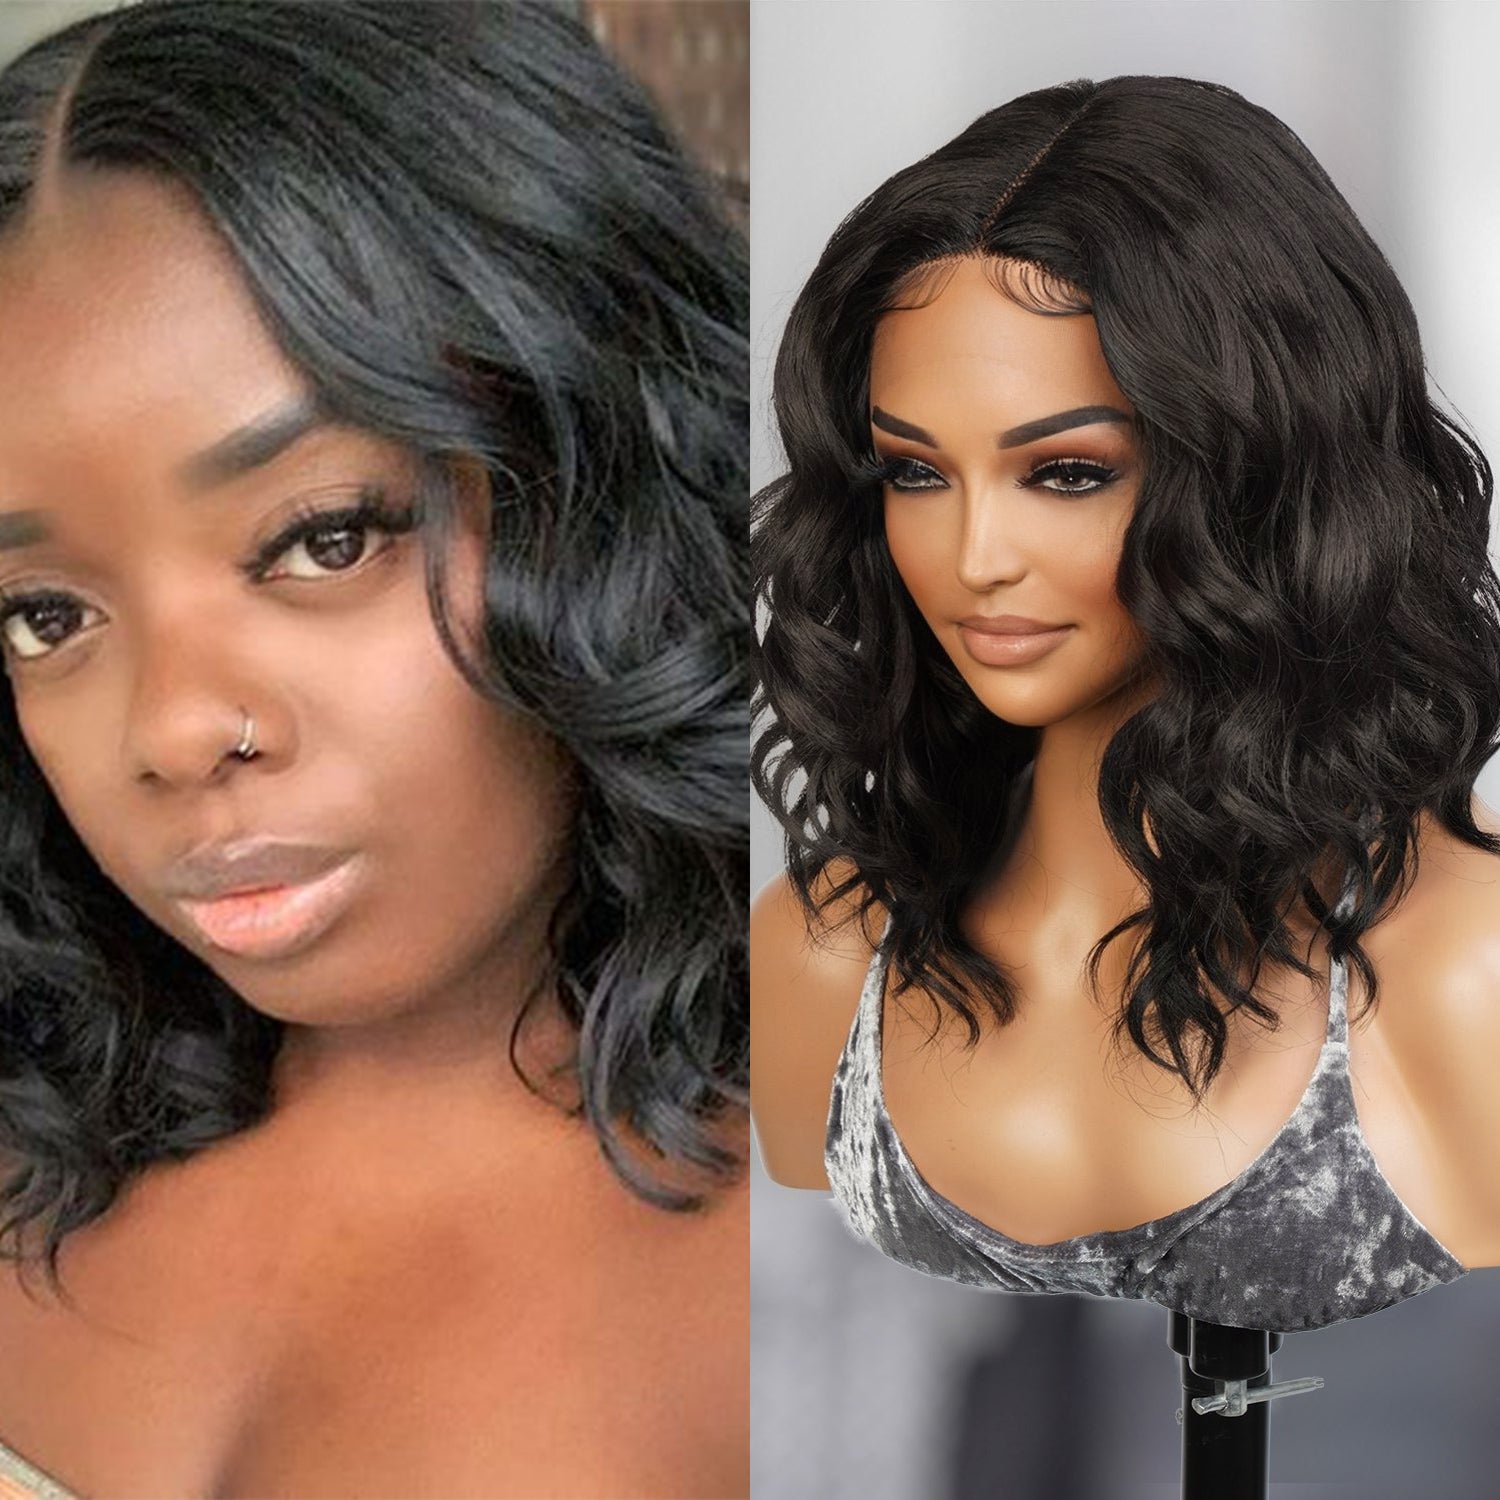  Introducing our stunning loose deep wave bob wig! Made with high-quality heat-resistant synthetic fibers, this wig features a middle center part Swiss lace front design for a natural-looking hairline. The wavy curly style adds volume and dimension to your hair, while the 12-inch length and bob cut offer a trendy touch. Perfect for black women, this easy-to-wear and style wig is a must-have for any occasion. Shop now for ultimate style and versatility!